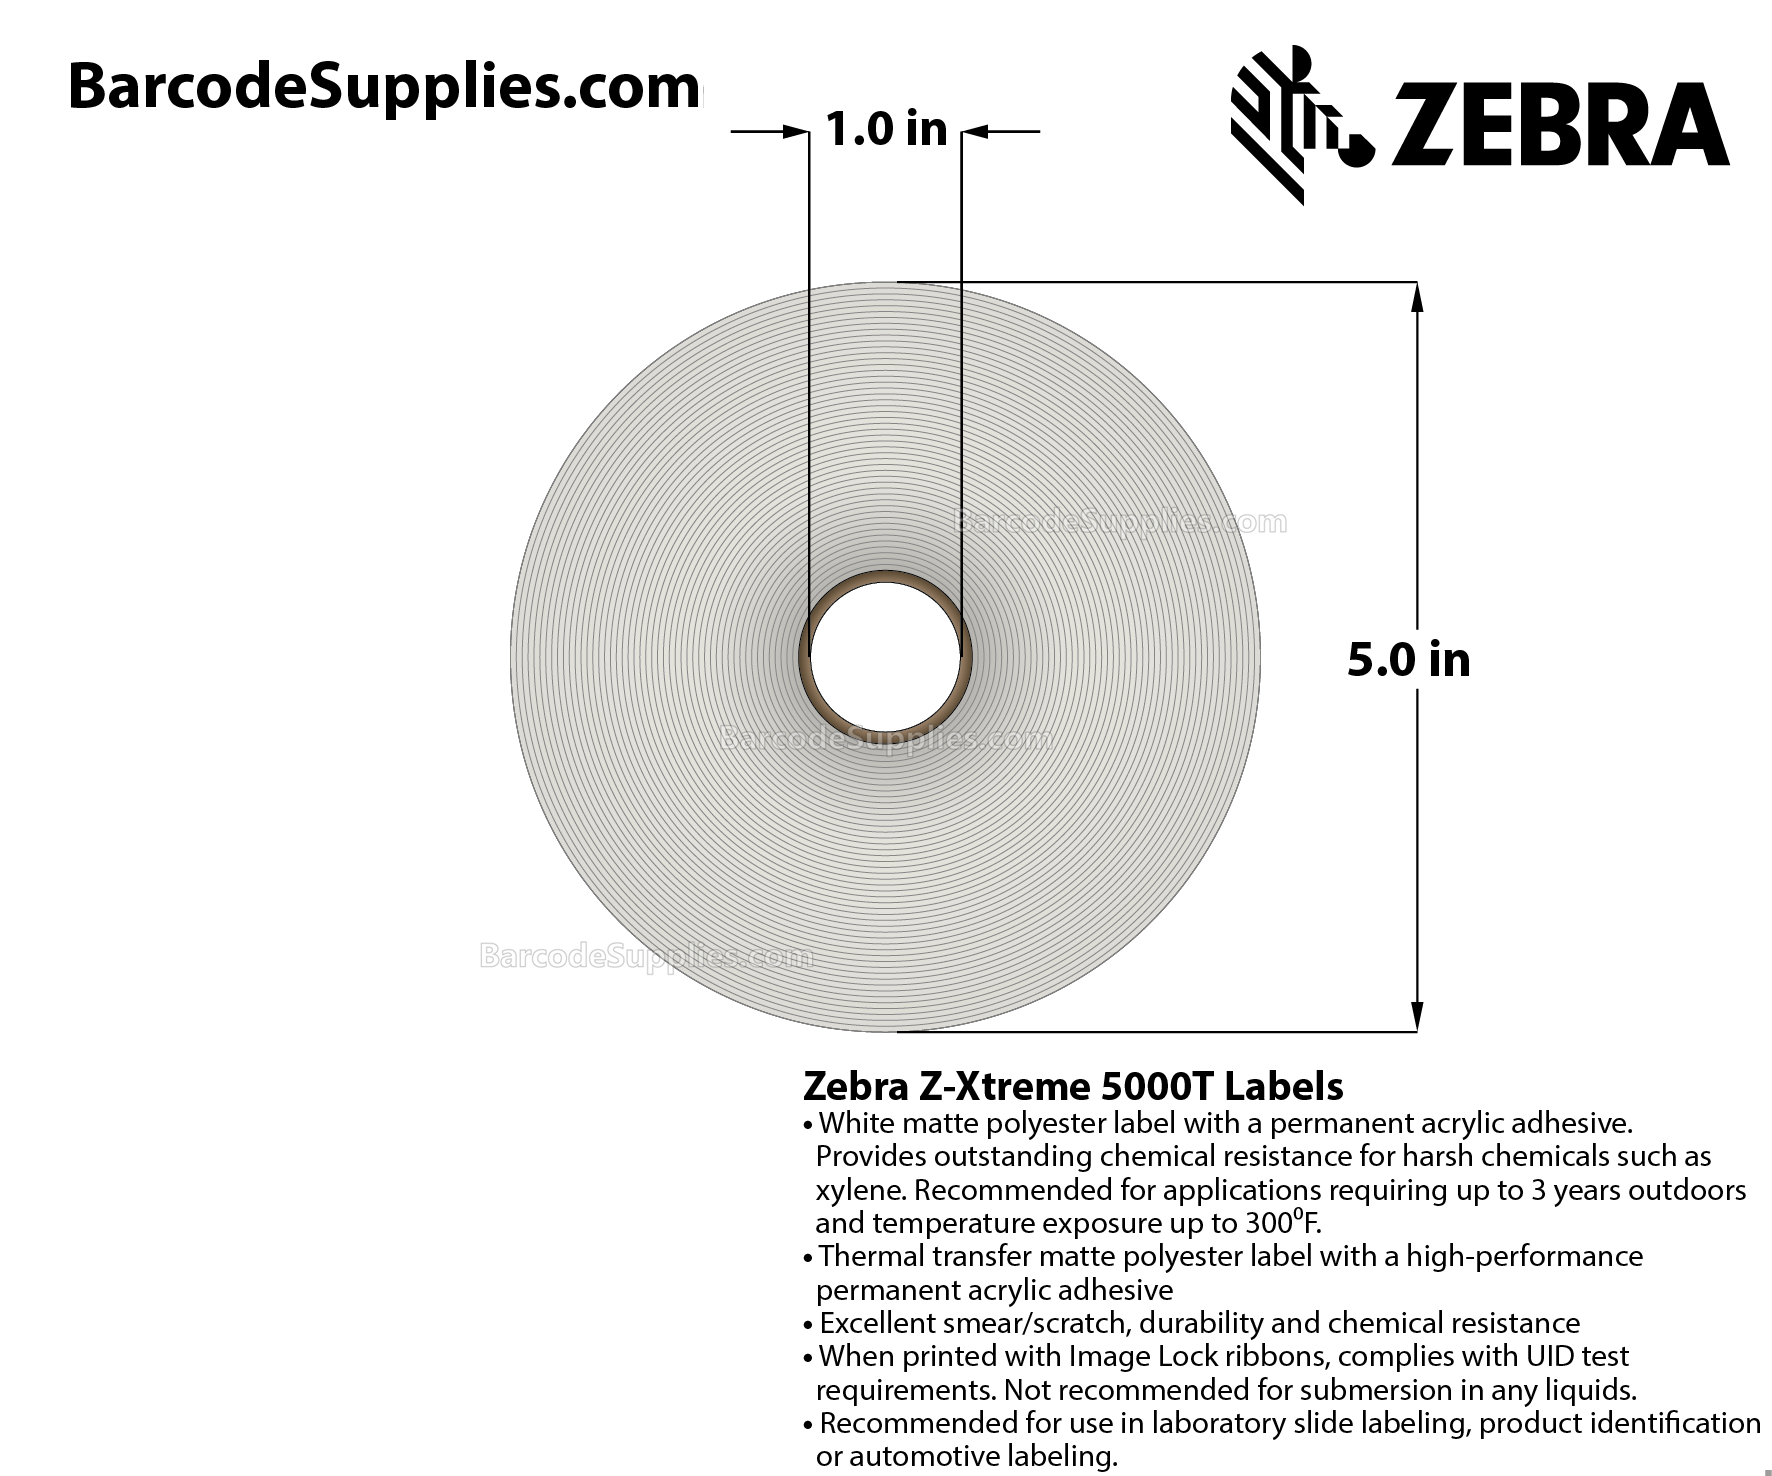 2.5 x 2.5 Thermal Transfer White Z-Xtreme 5000T Labels With Permanent Adhesive - Perforated - 900 Labels Per Roll - Carton Of 1 Rolls - 900 Labels Total - MPN: 10023252